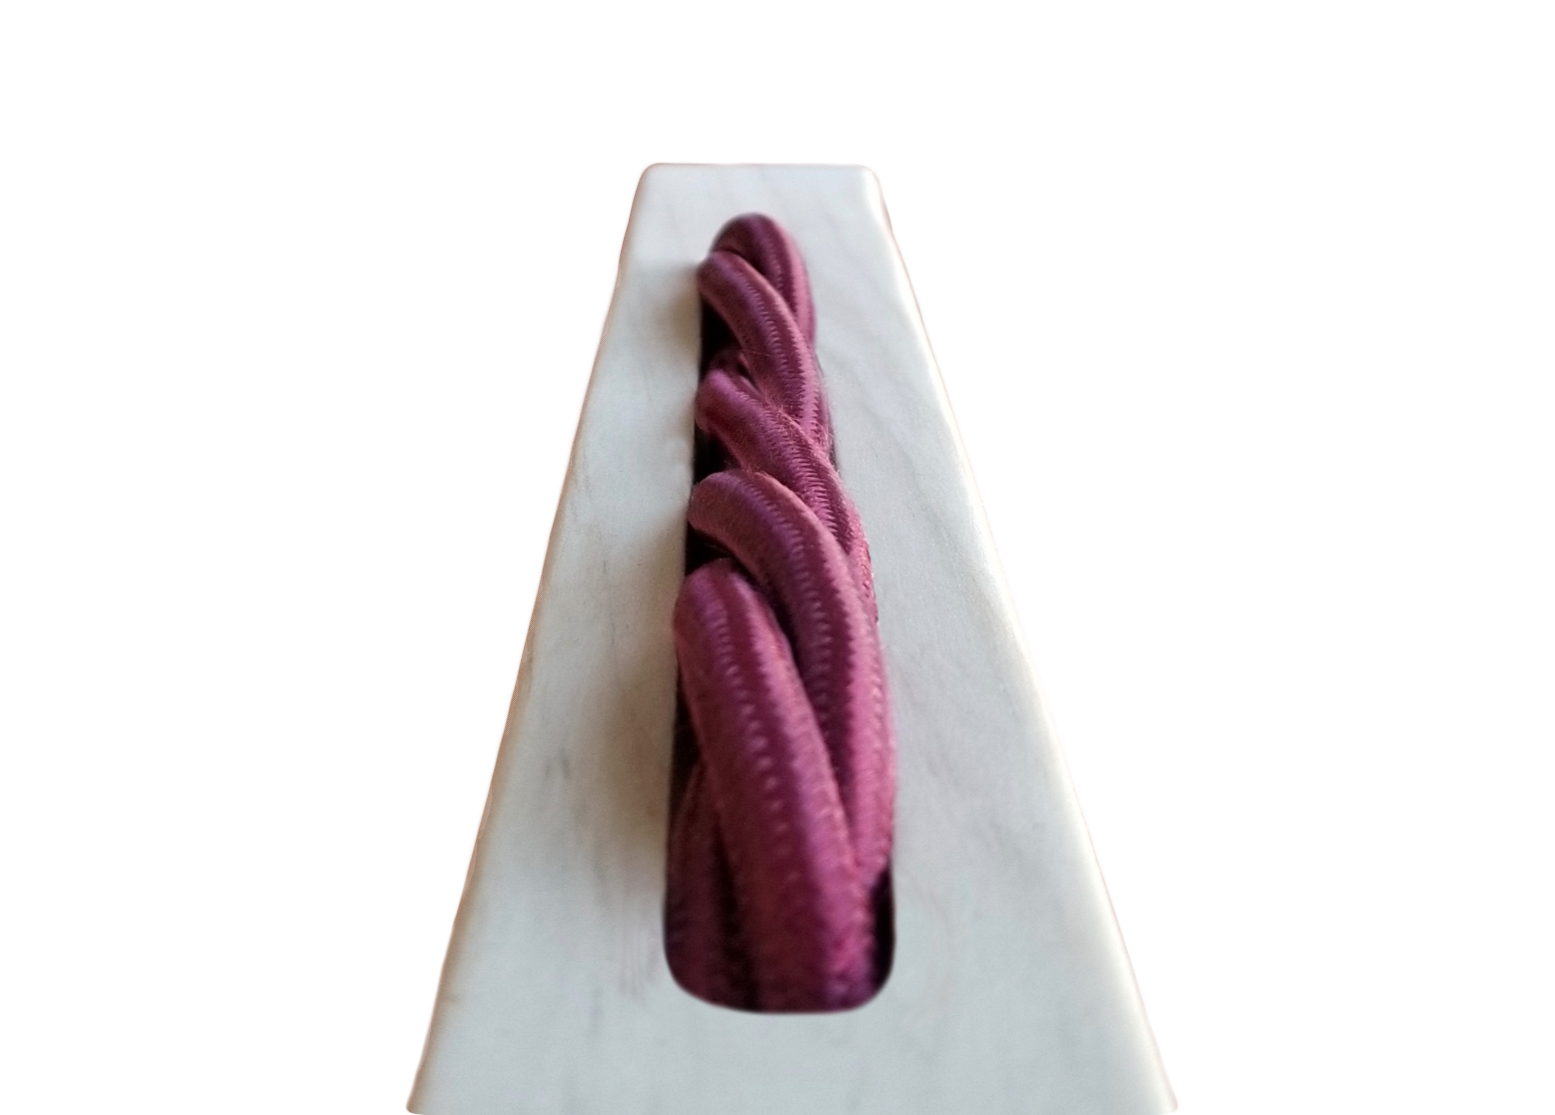  To link the cold shells to the natural wooden frame, a custom maroon weaved electrical cord is inlaid on the top support 